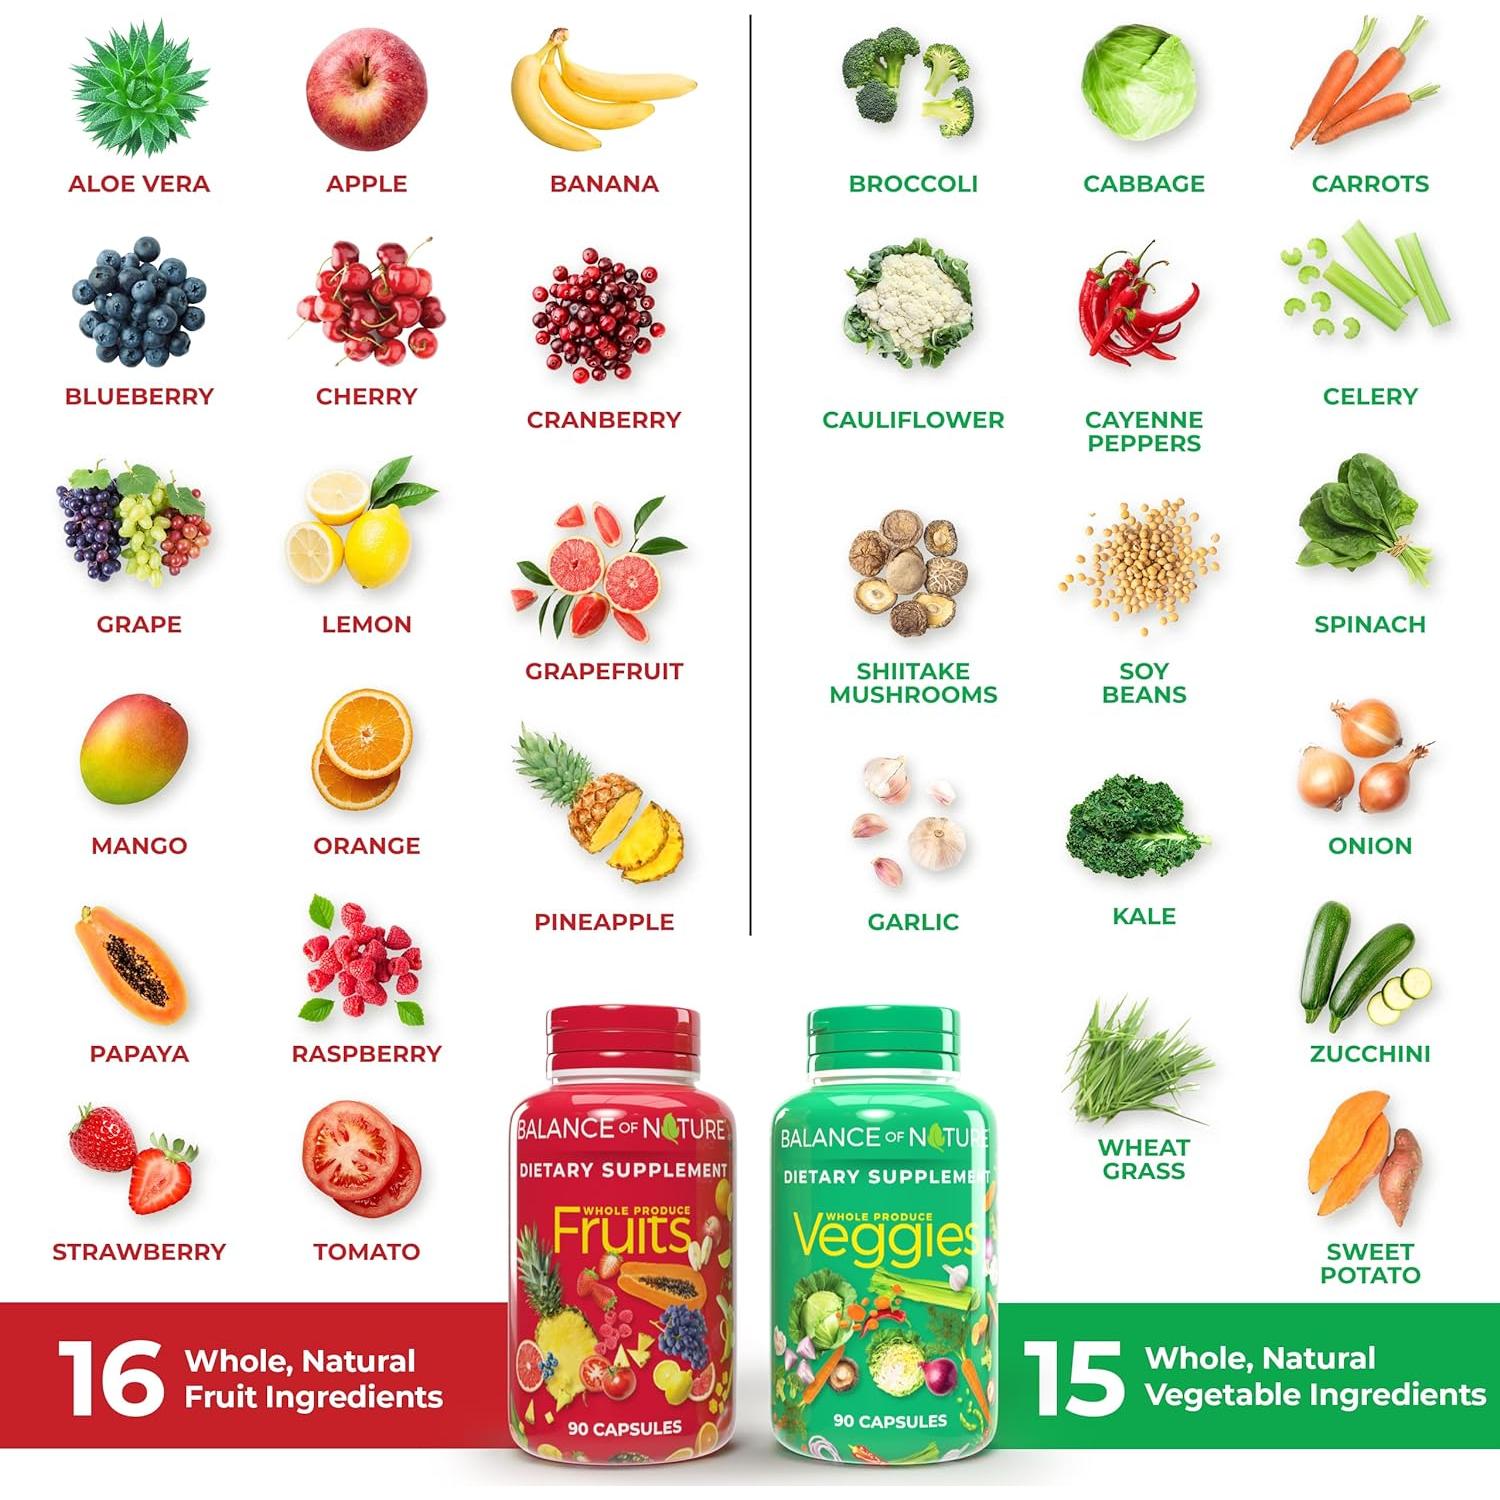 Balance of Nature Fruits and Veggies - Whole Food Supplement - 90 Capsules Each (2 Pack)